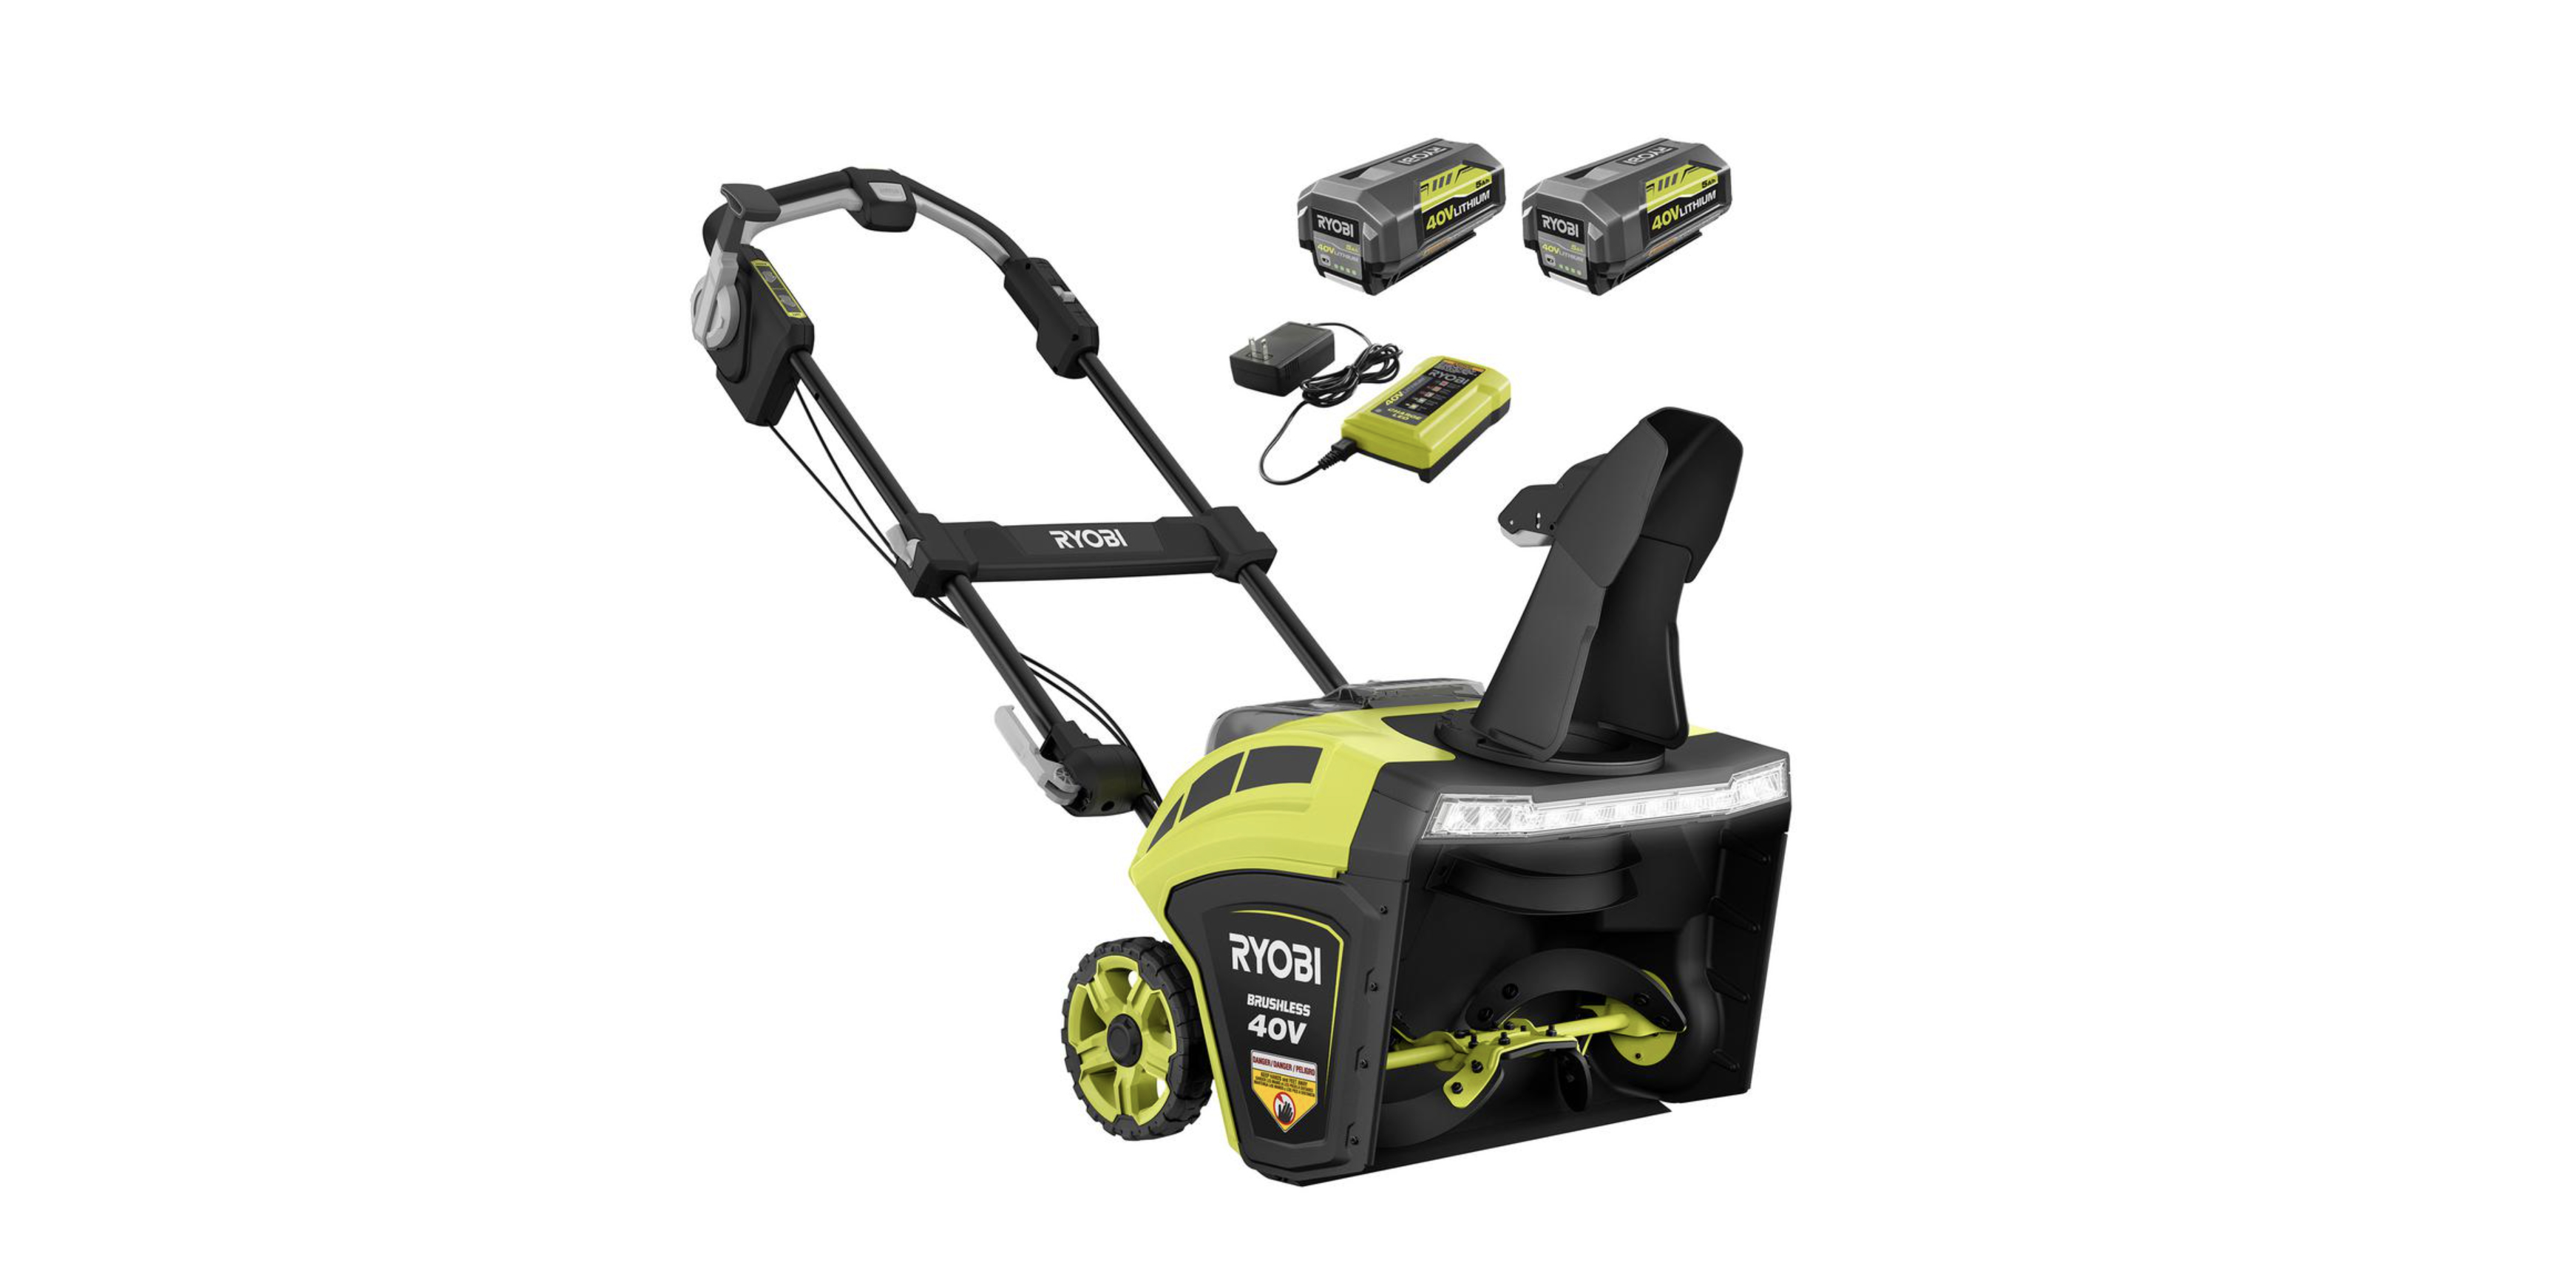 RYOBI Black Friday sale at Home Depot takes up to 40 off tools and more